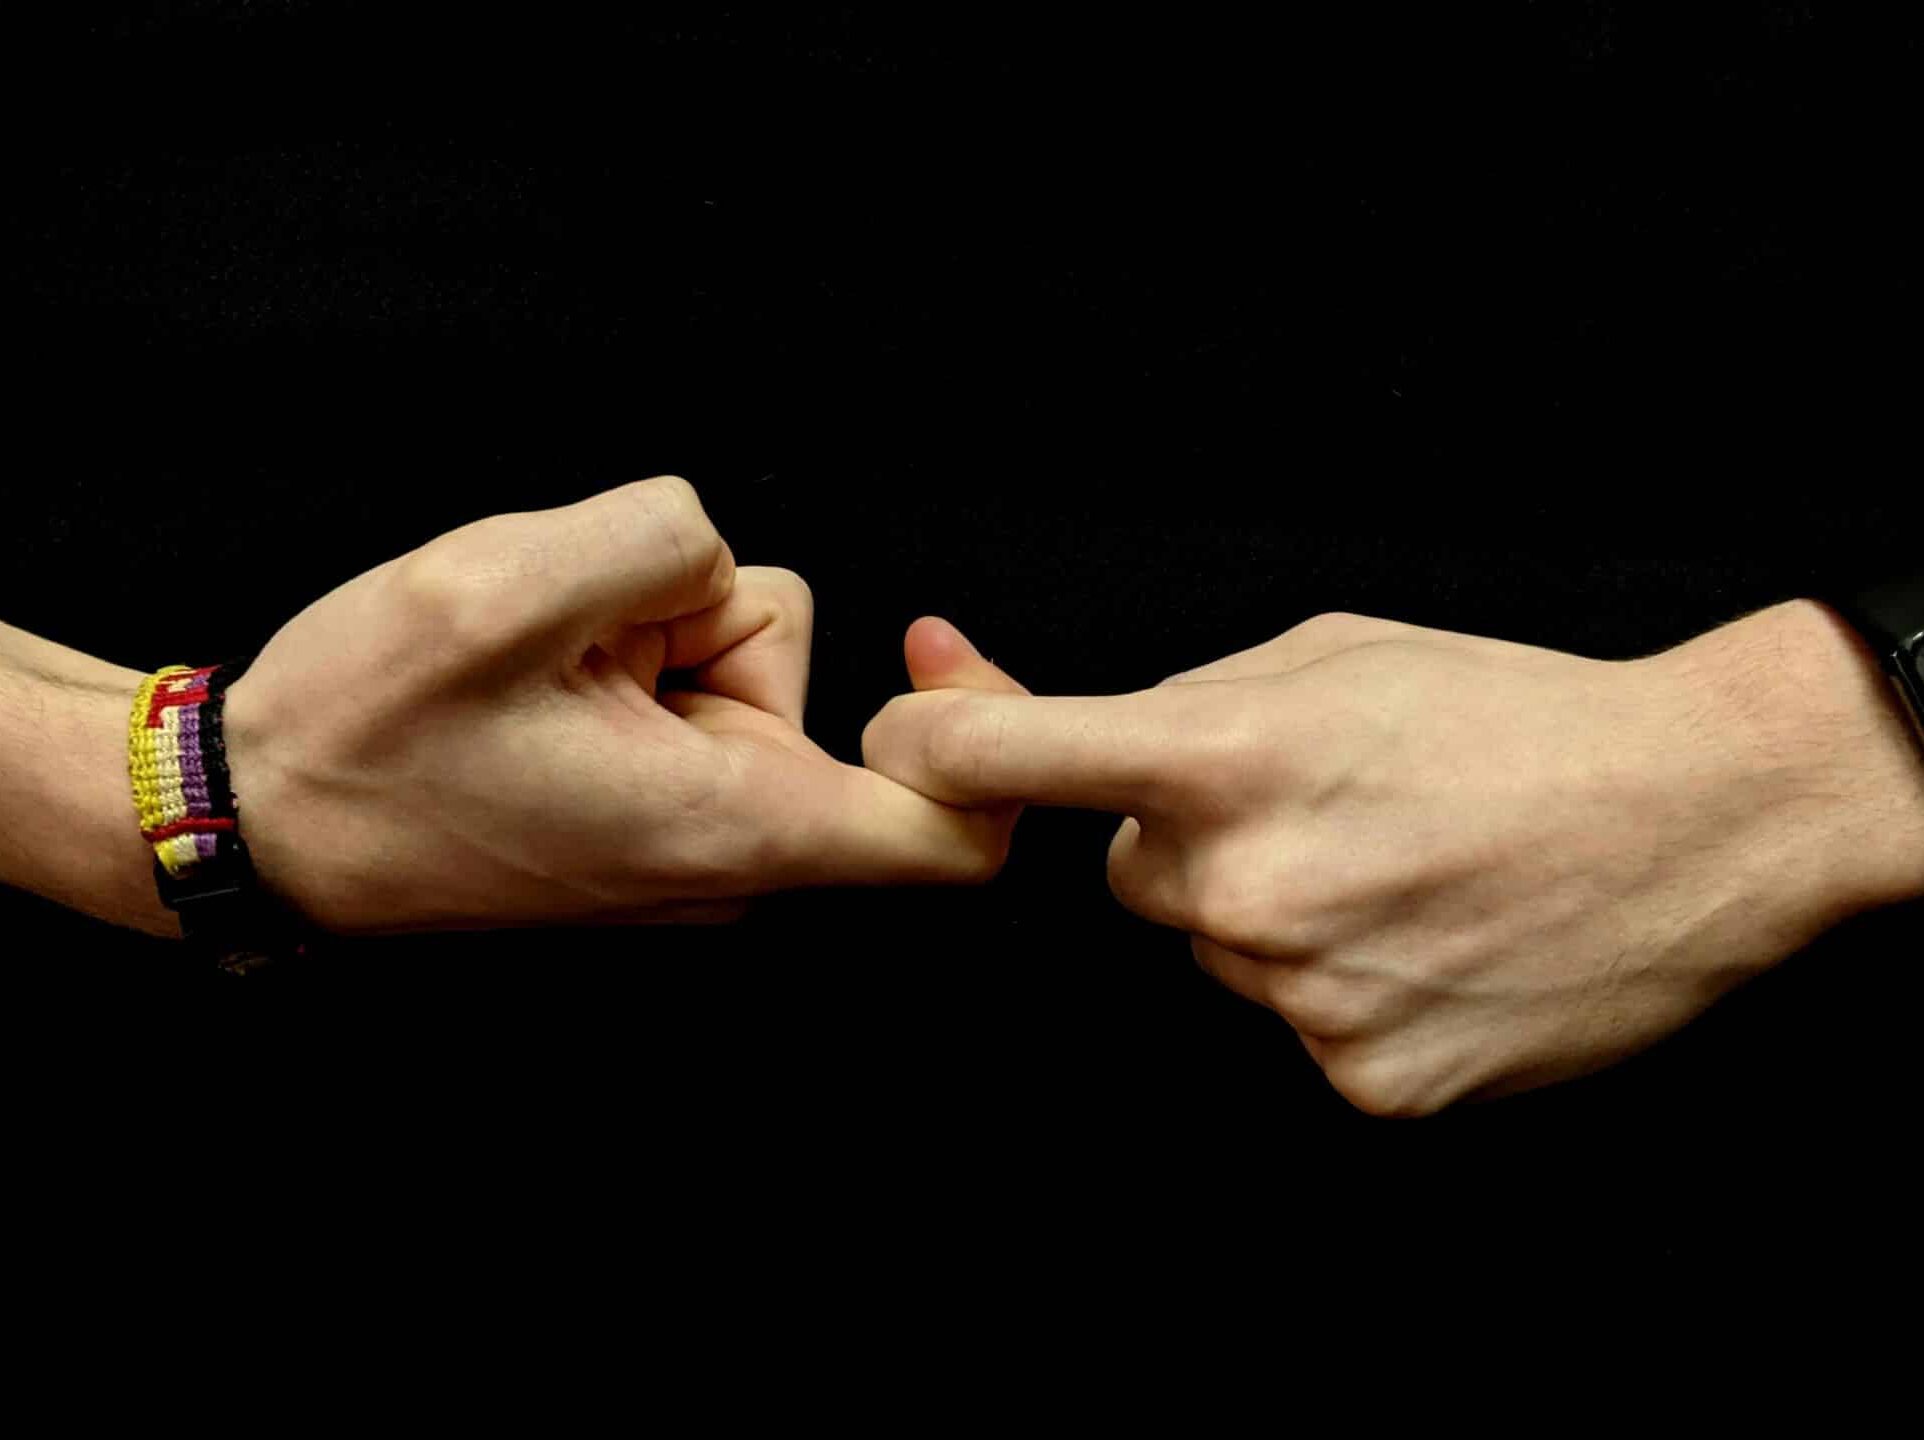 The hands of a young white person against a black background form the first half of the sign for “friendship” in American Sign Language.